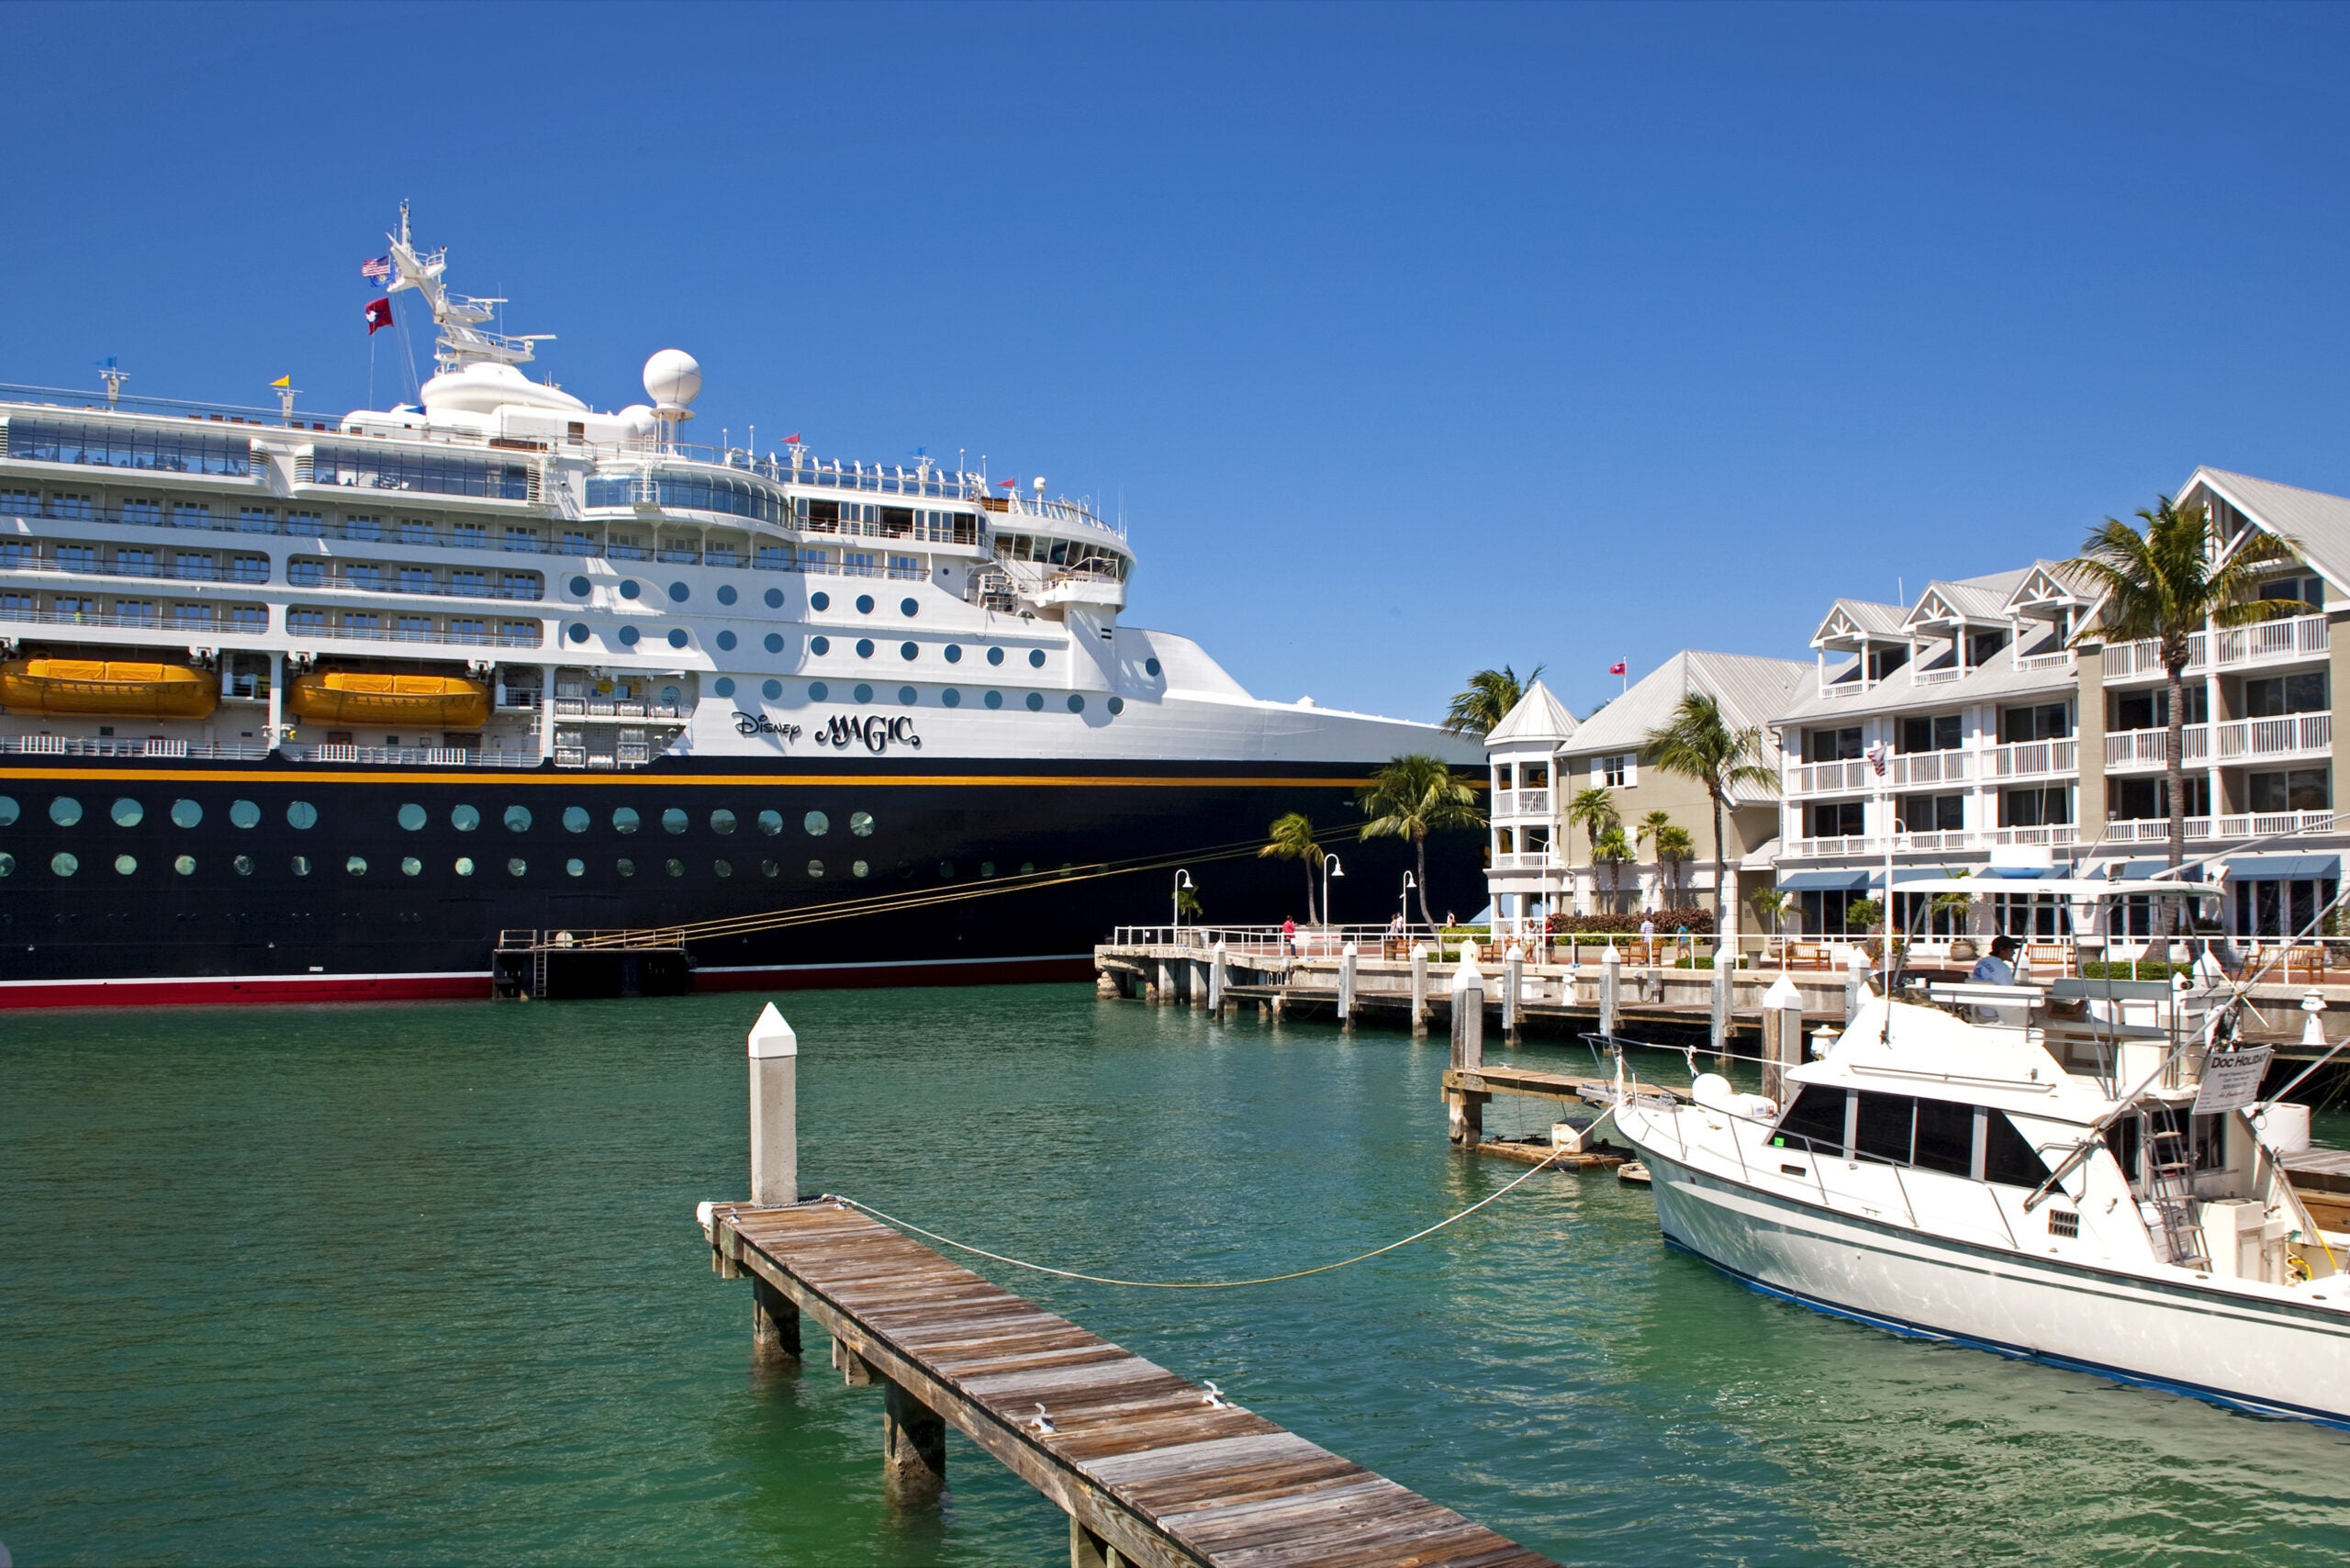 Key West voters deliver a blow to cruise lines with big-ship ban